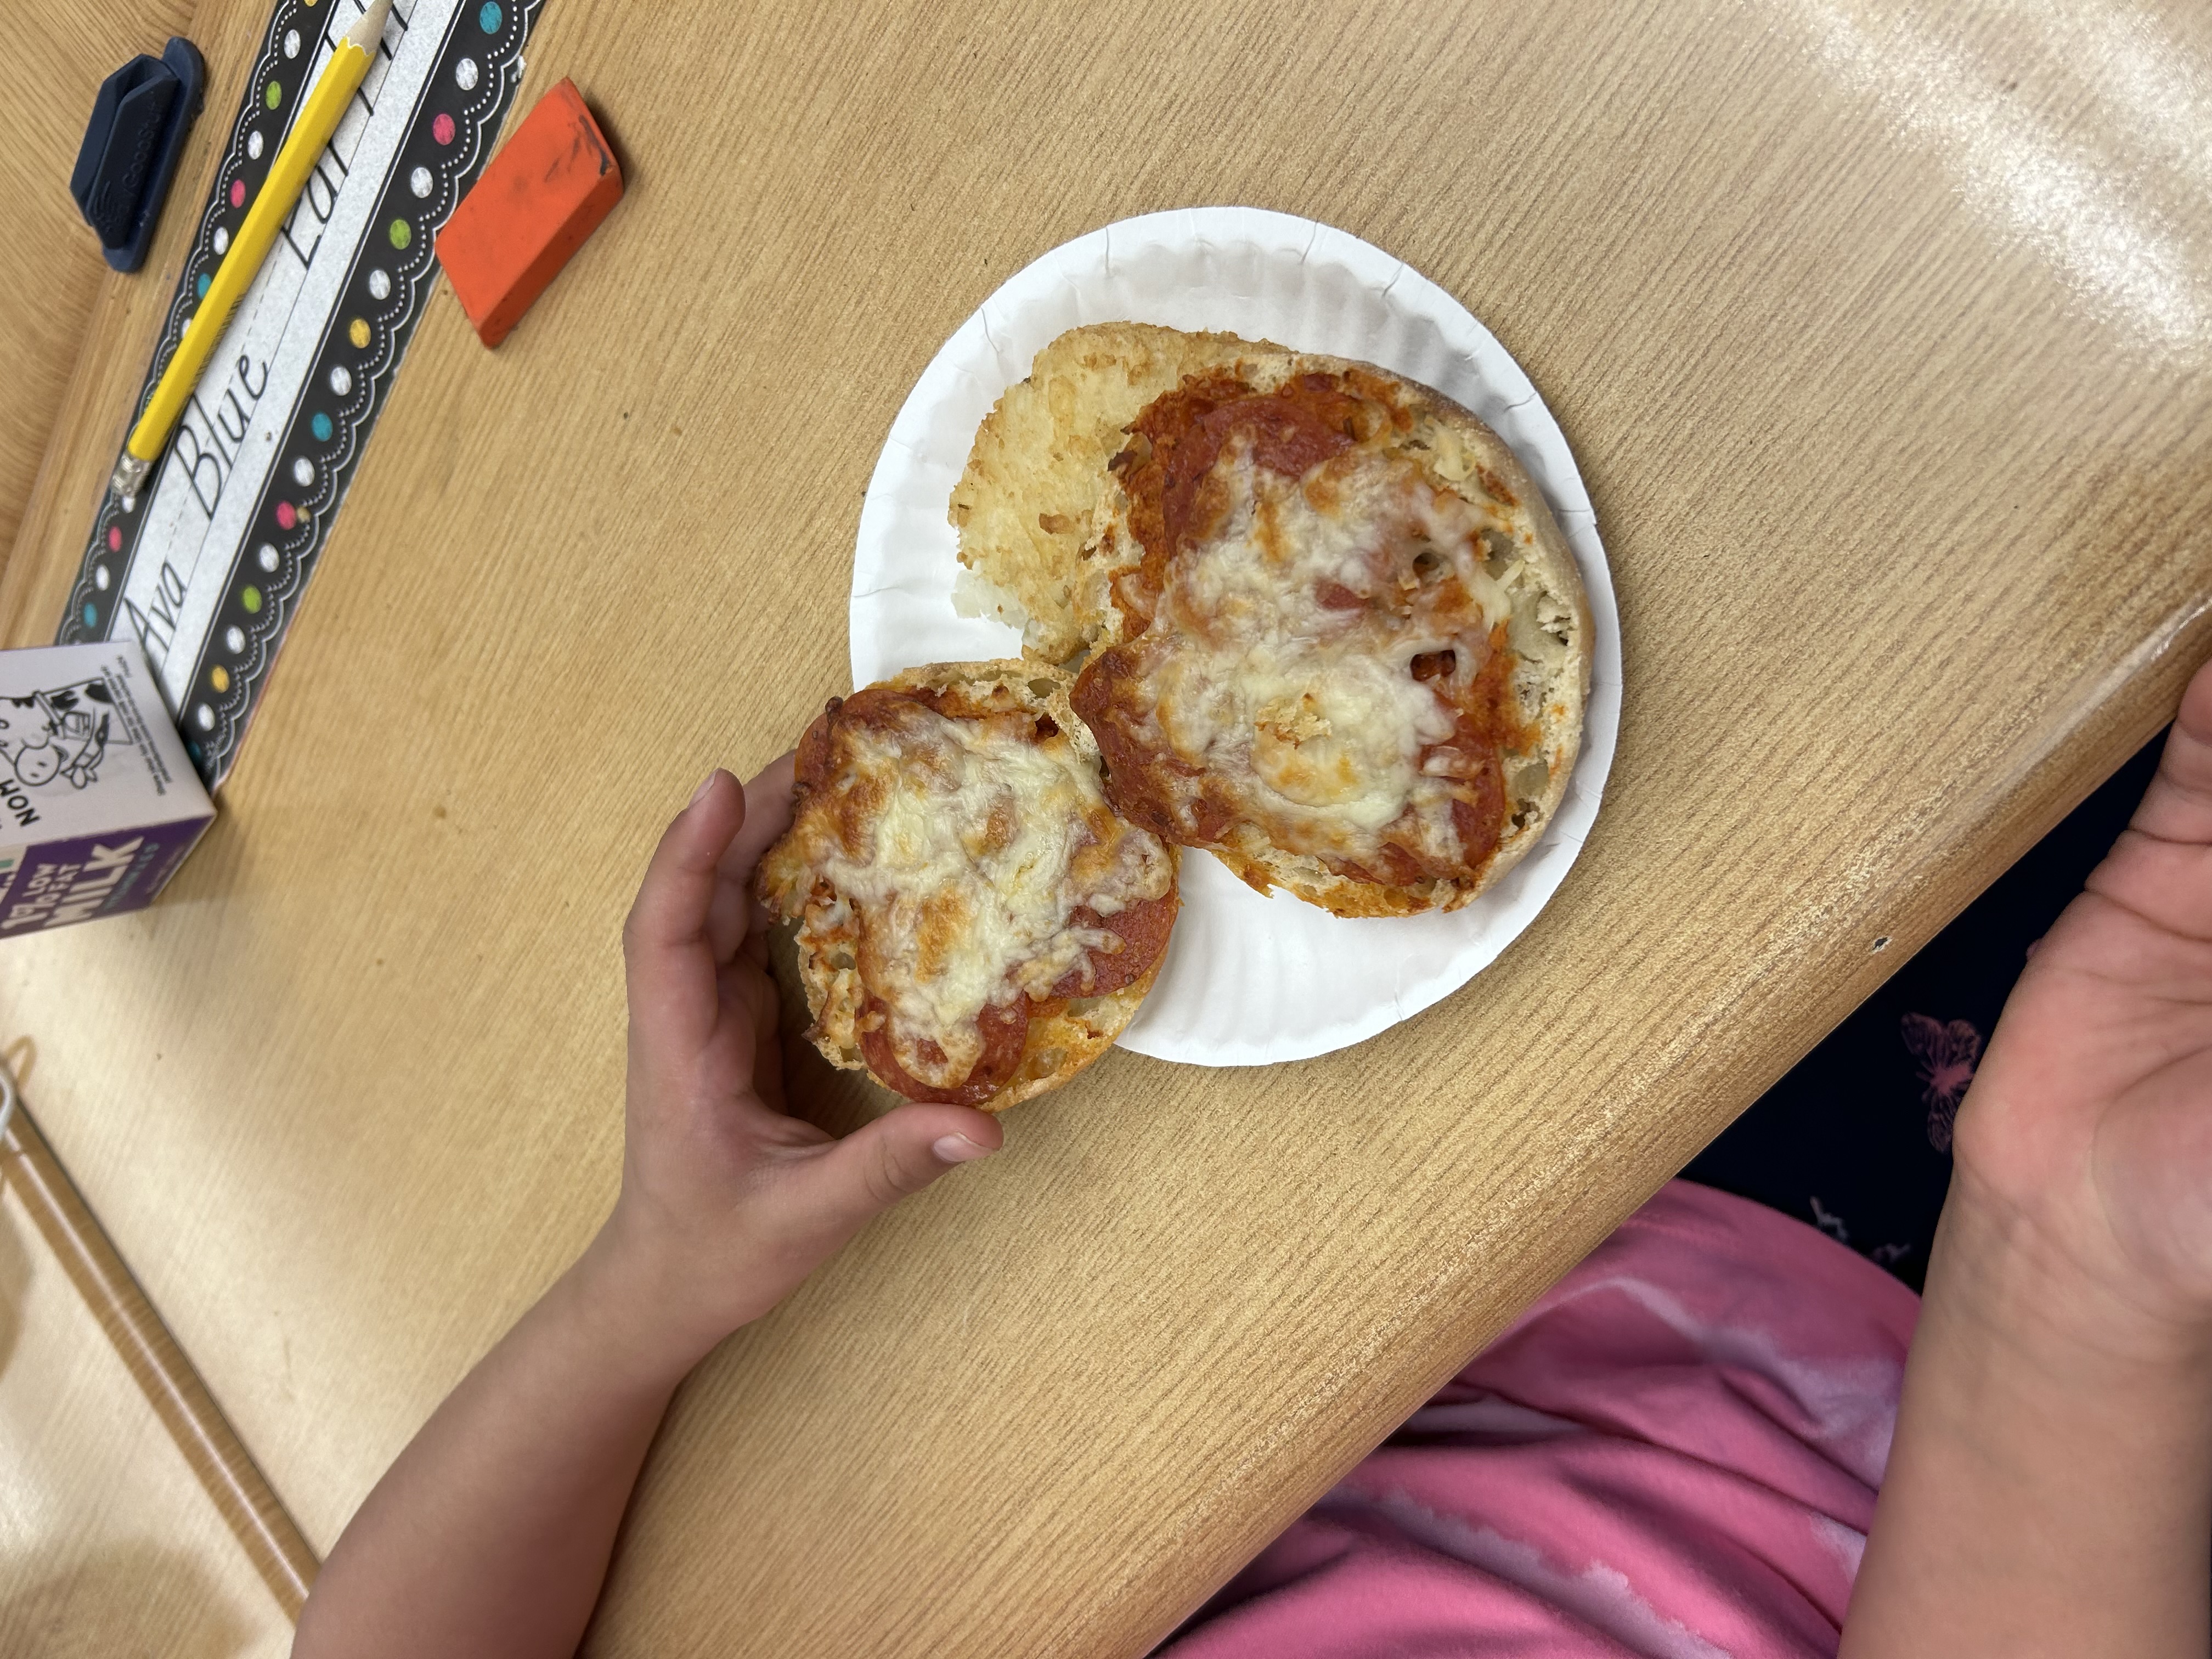 Student holding their pizza they made